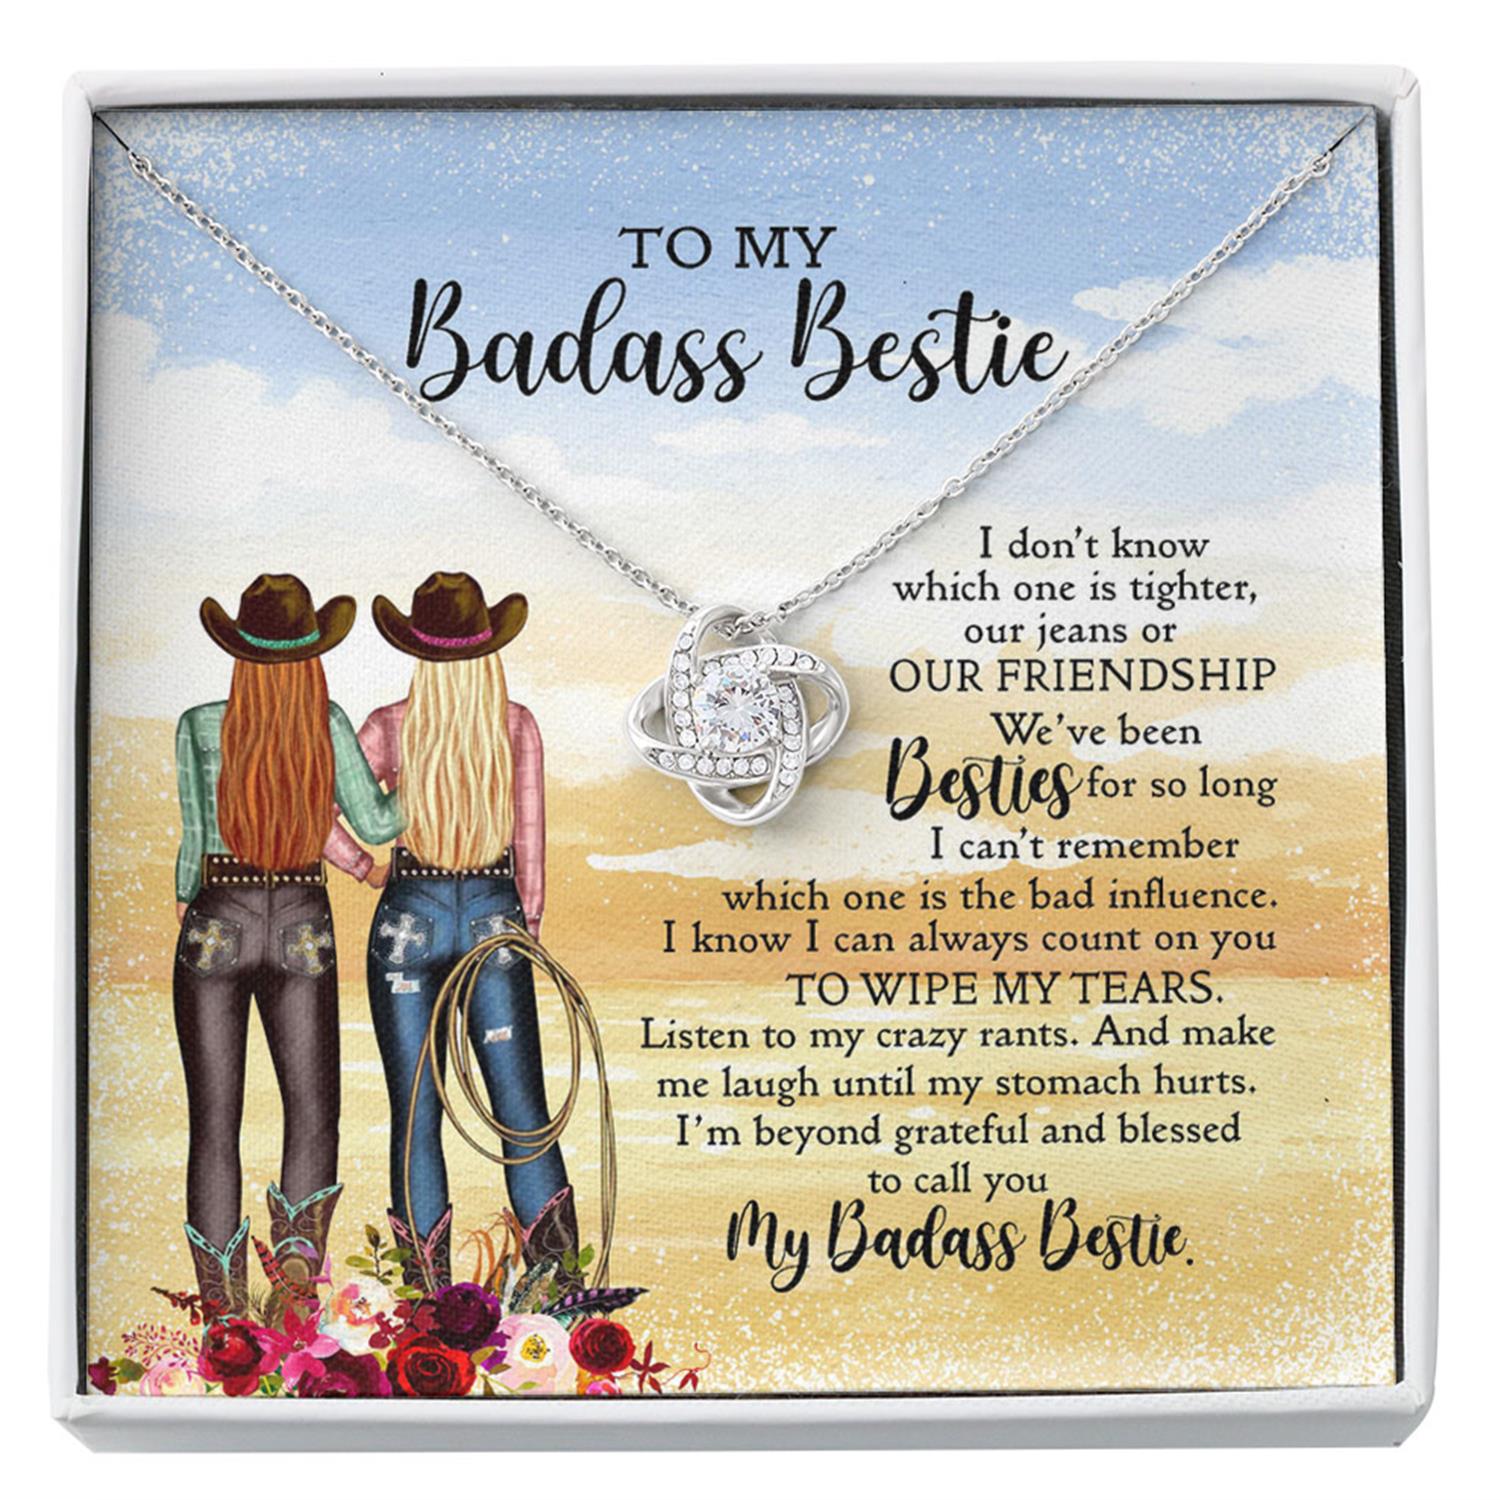 Best Friend Necklace, To My Badass Bestie Necklace - Country Girl Edition Necklace,Gift For Best Friend, BFF, Soul Sister Custom Necklace